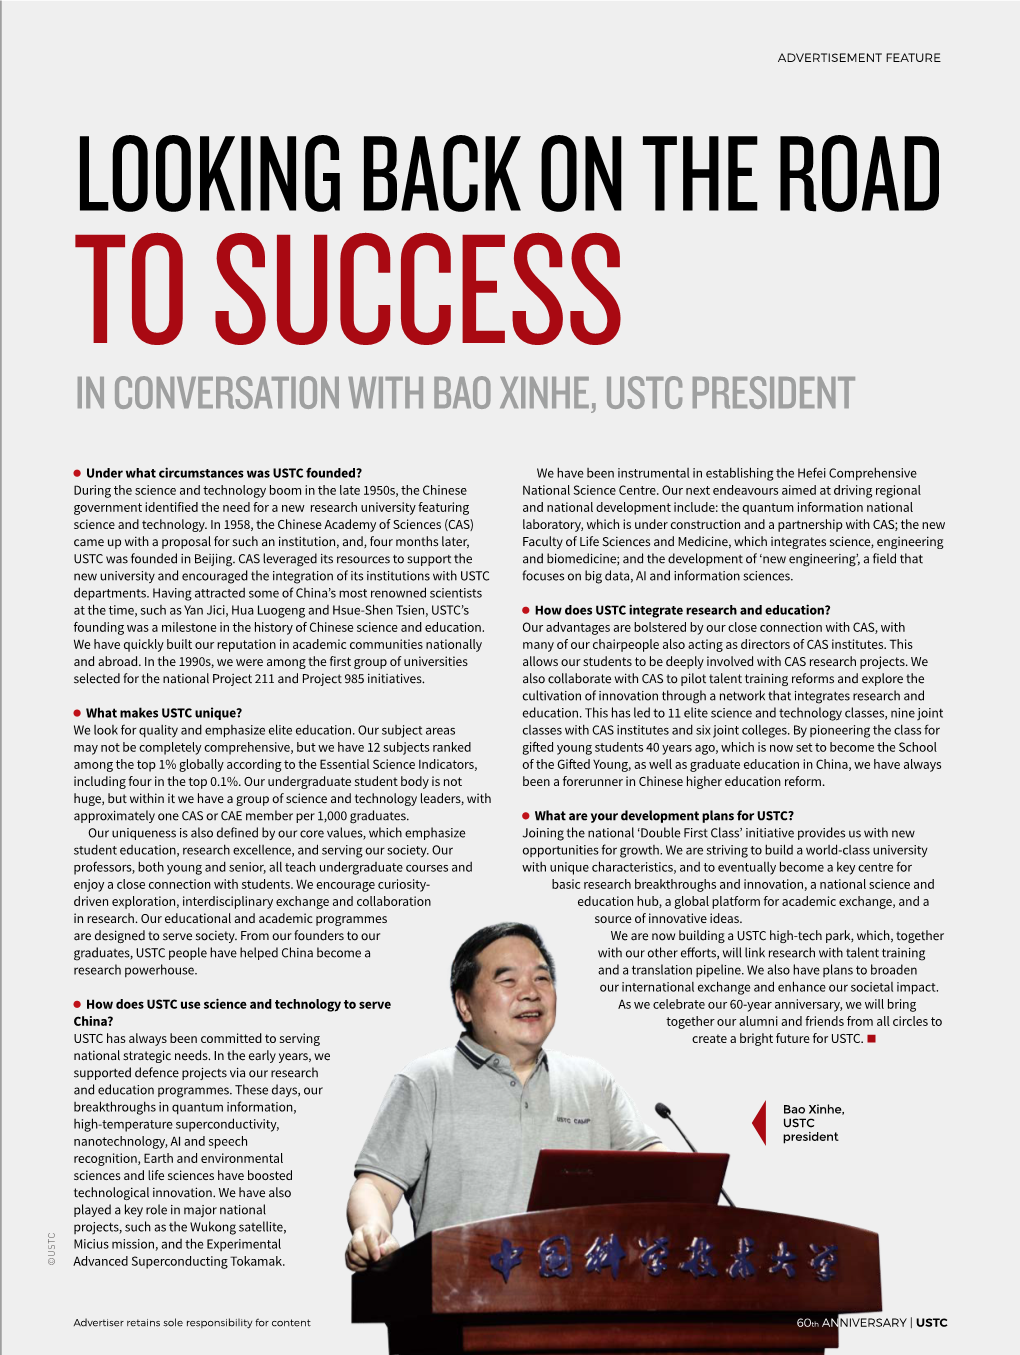 Looking Back on the Road to Success in Conversation with Bao Xinhe, Ustc President